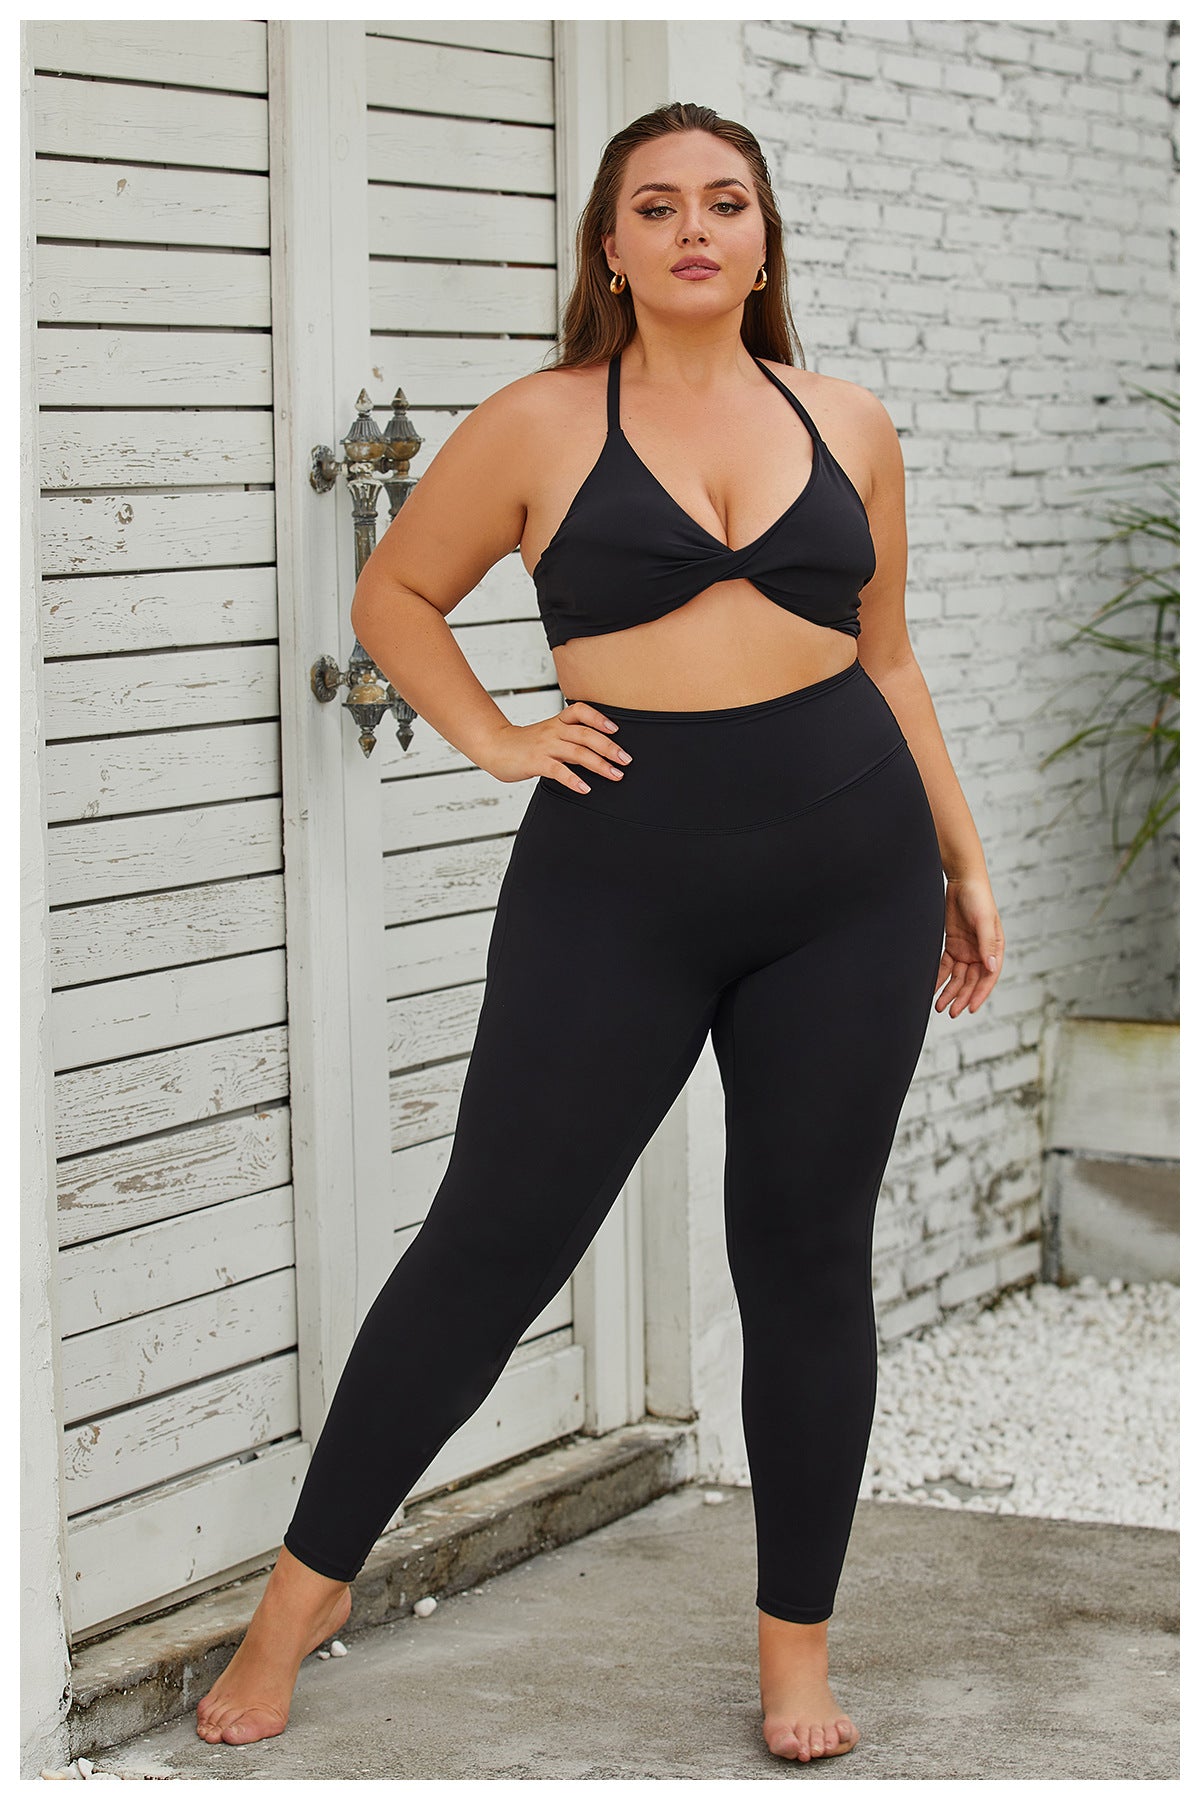 Plus Size Yoga Wear Suit Women High Top Sports Tight Nude Feel Quick-Drying Workout Clothes